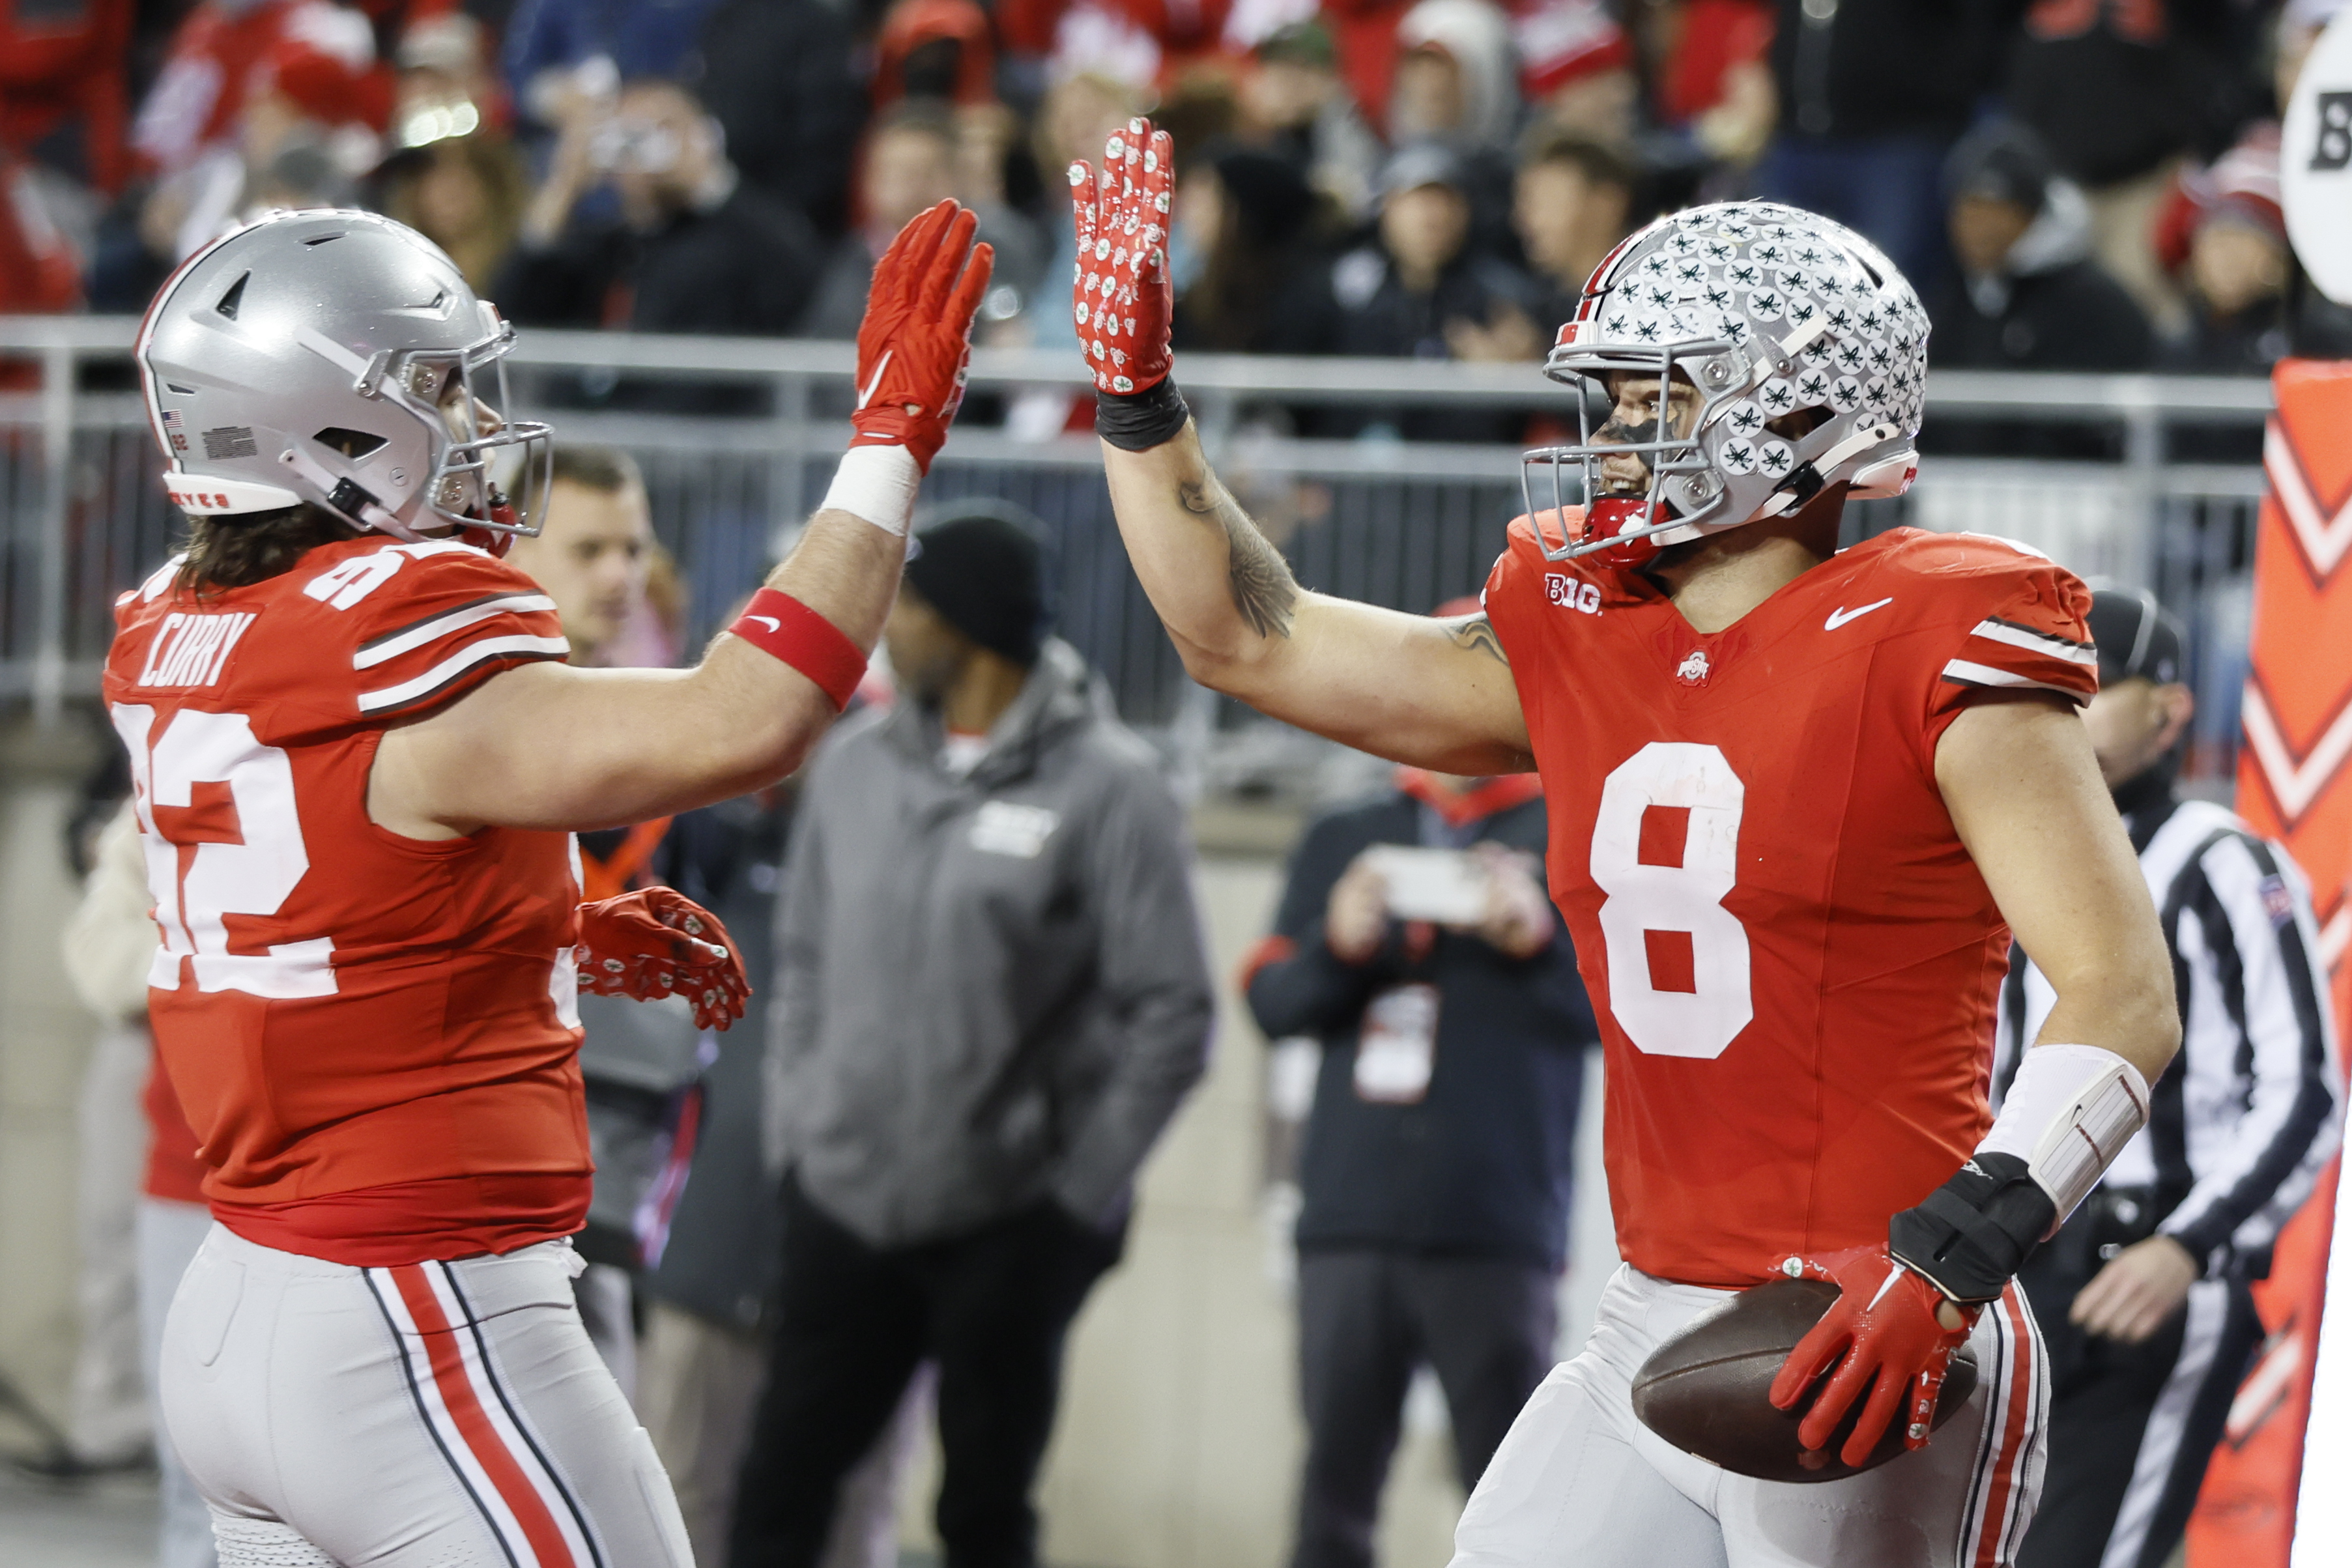 Henderson, McCord combine for 4 TDs as No. 3 Ohio State beats Minnesota  37-3 with Michigan up next